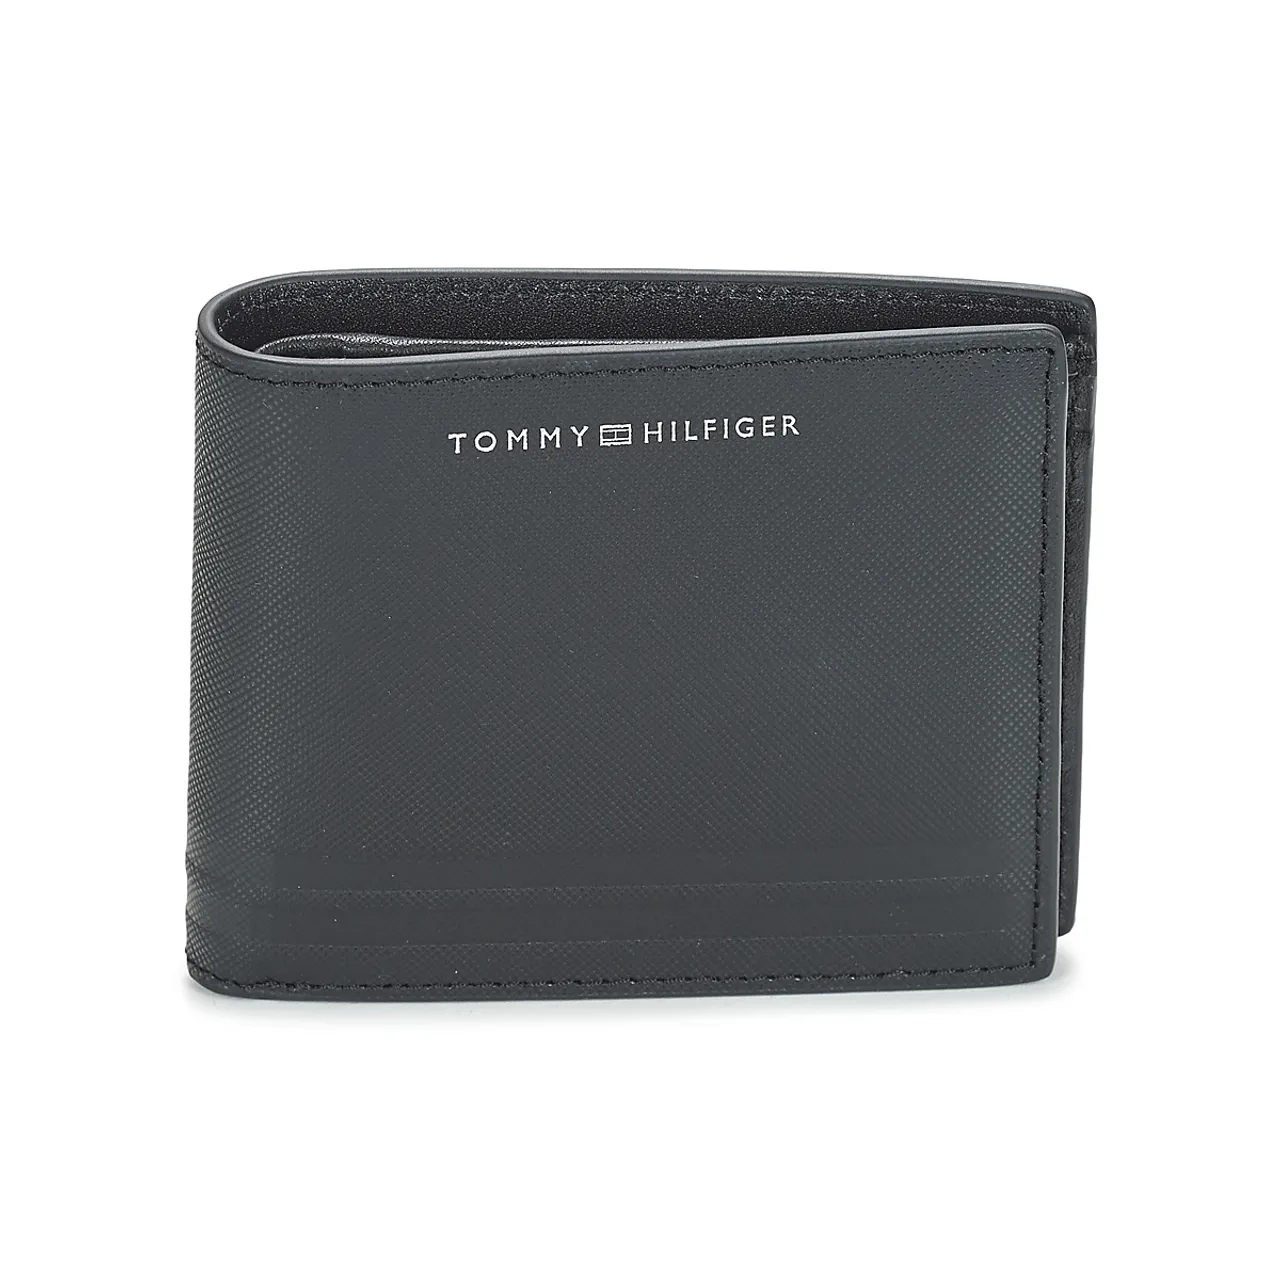 Tommy Hilfiger  TH BUSINESS LEATHER CC AND COIN  men's Purse wallet in Black